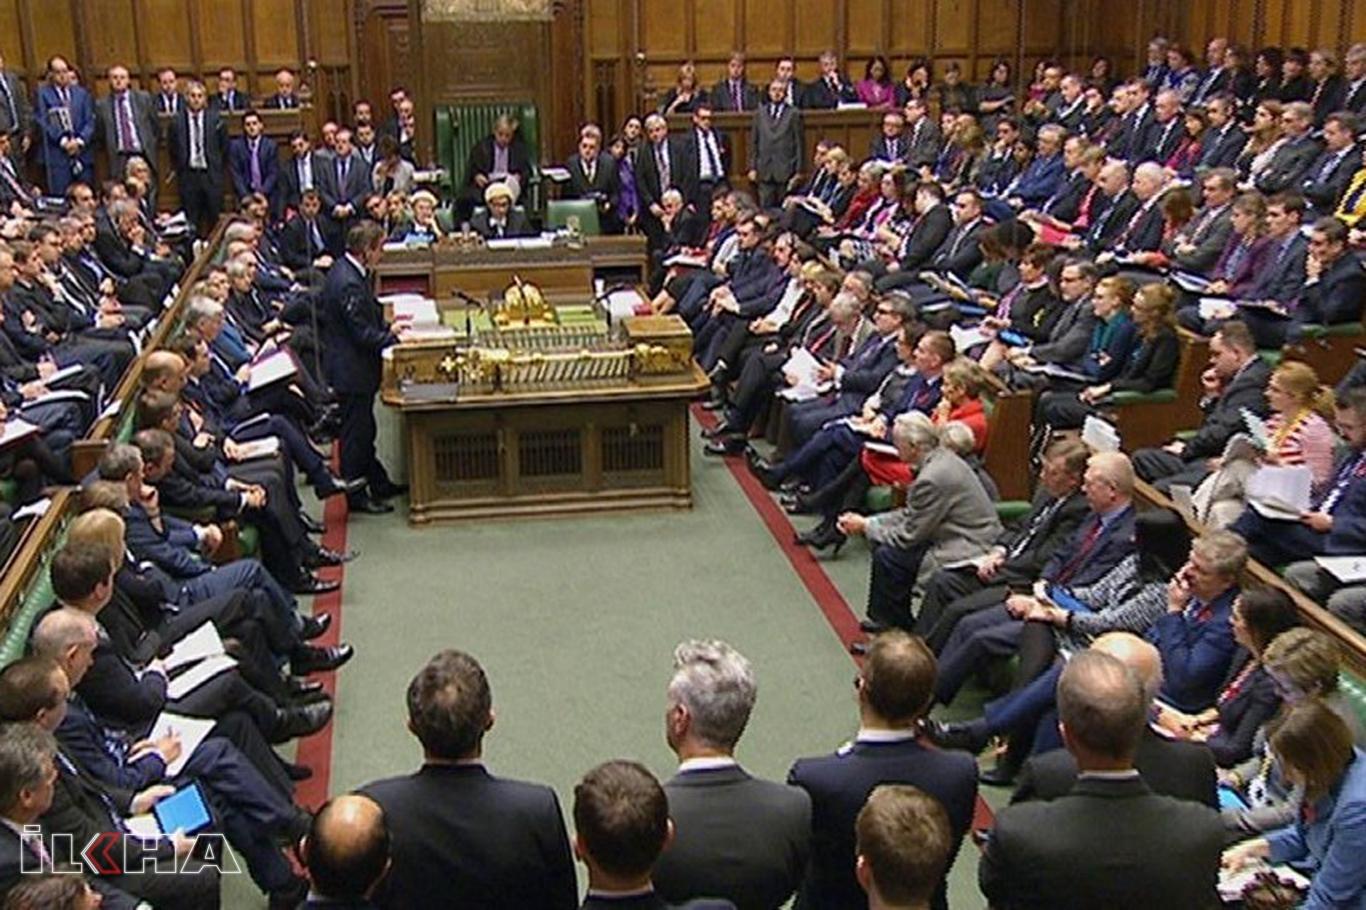 House of Commons approves law to delay Brexit